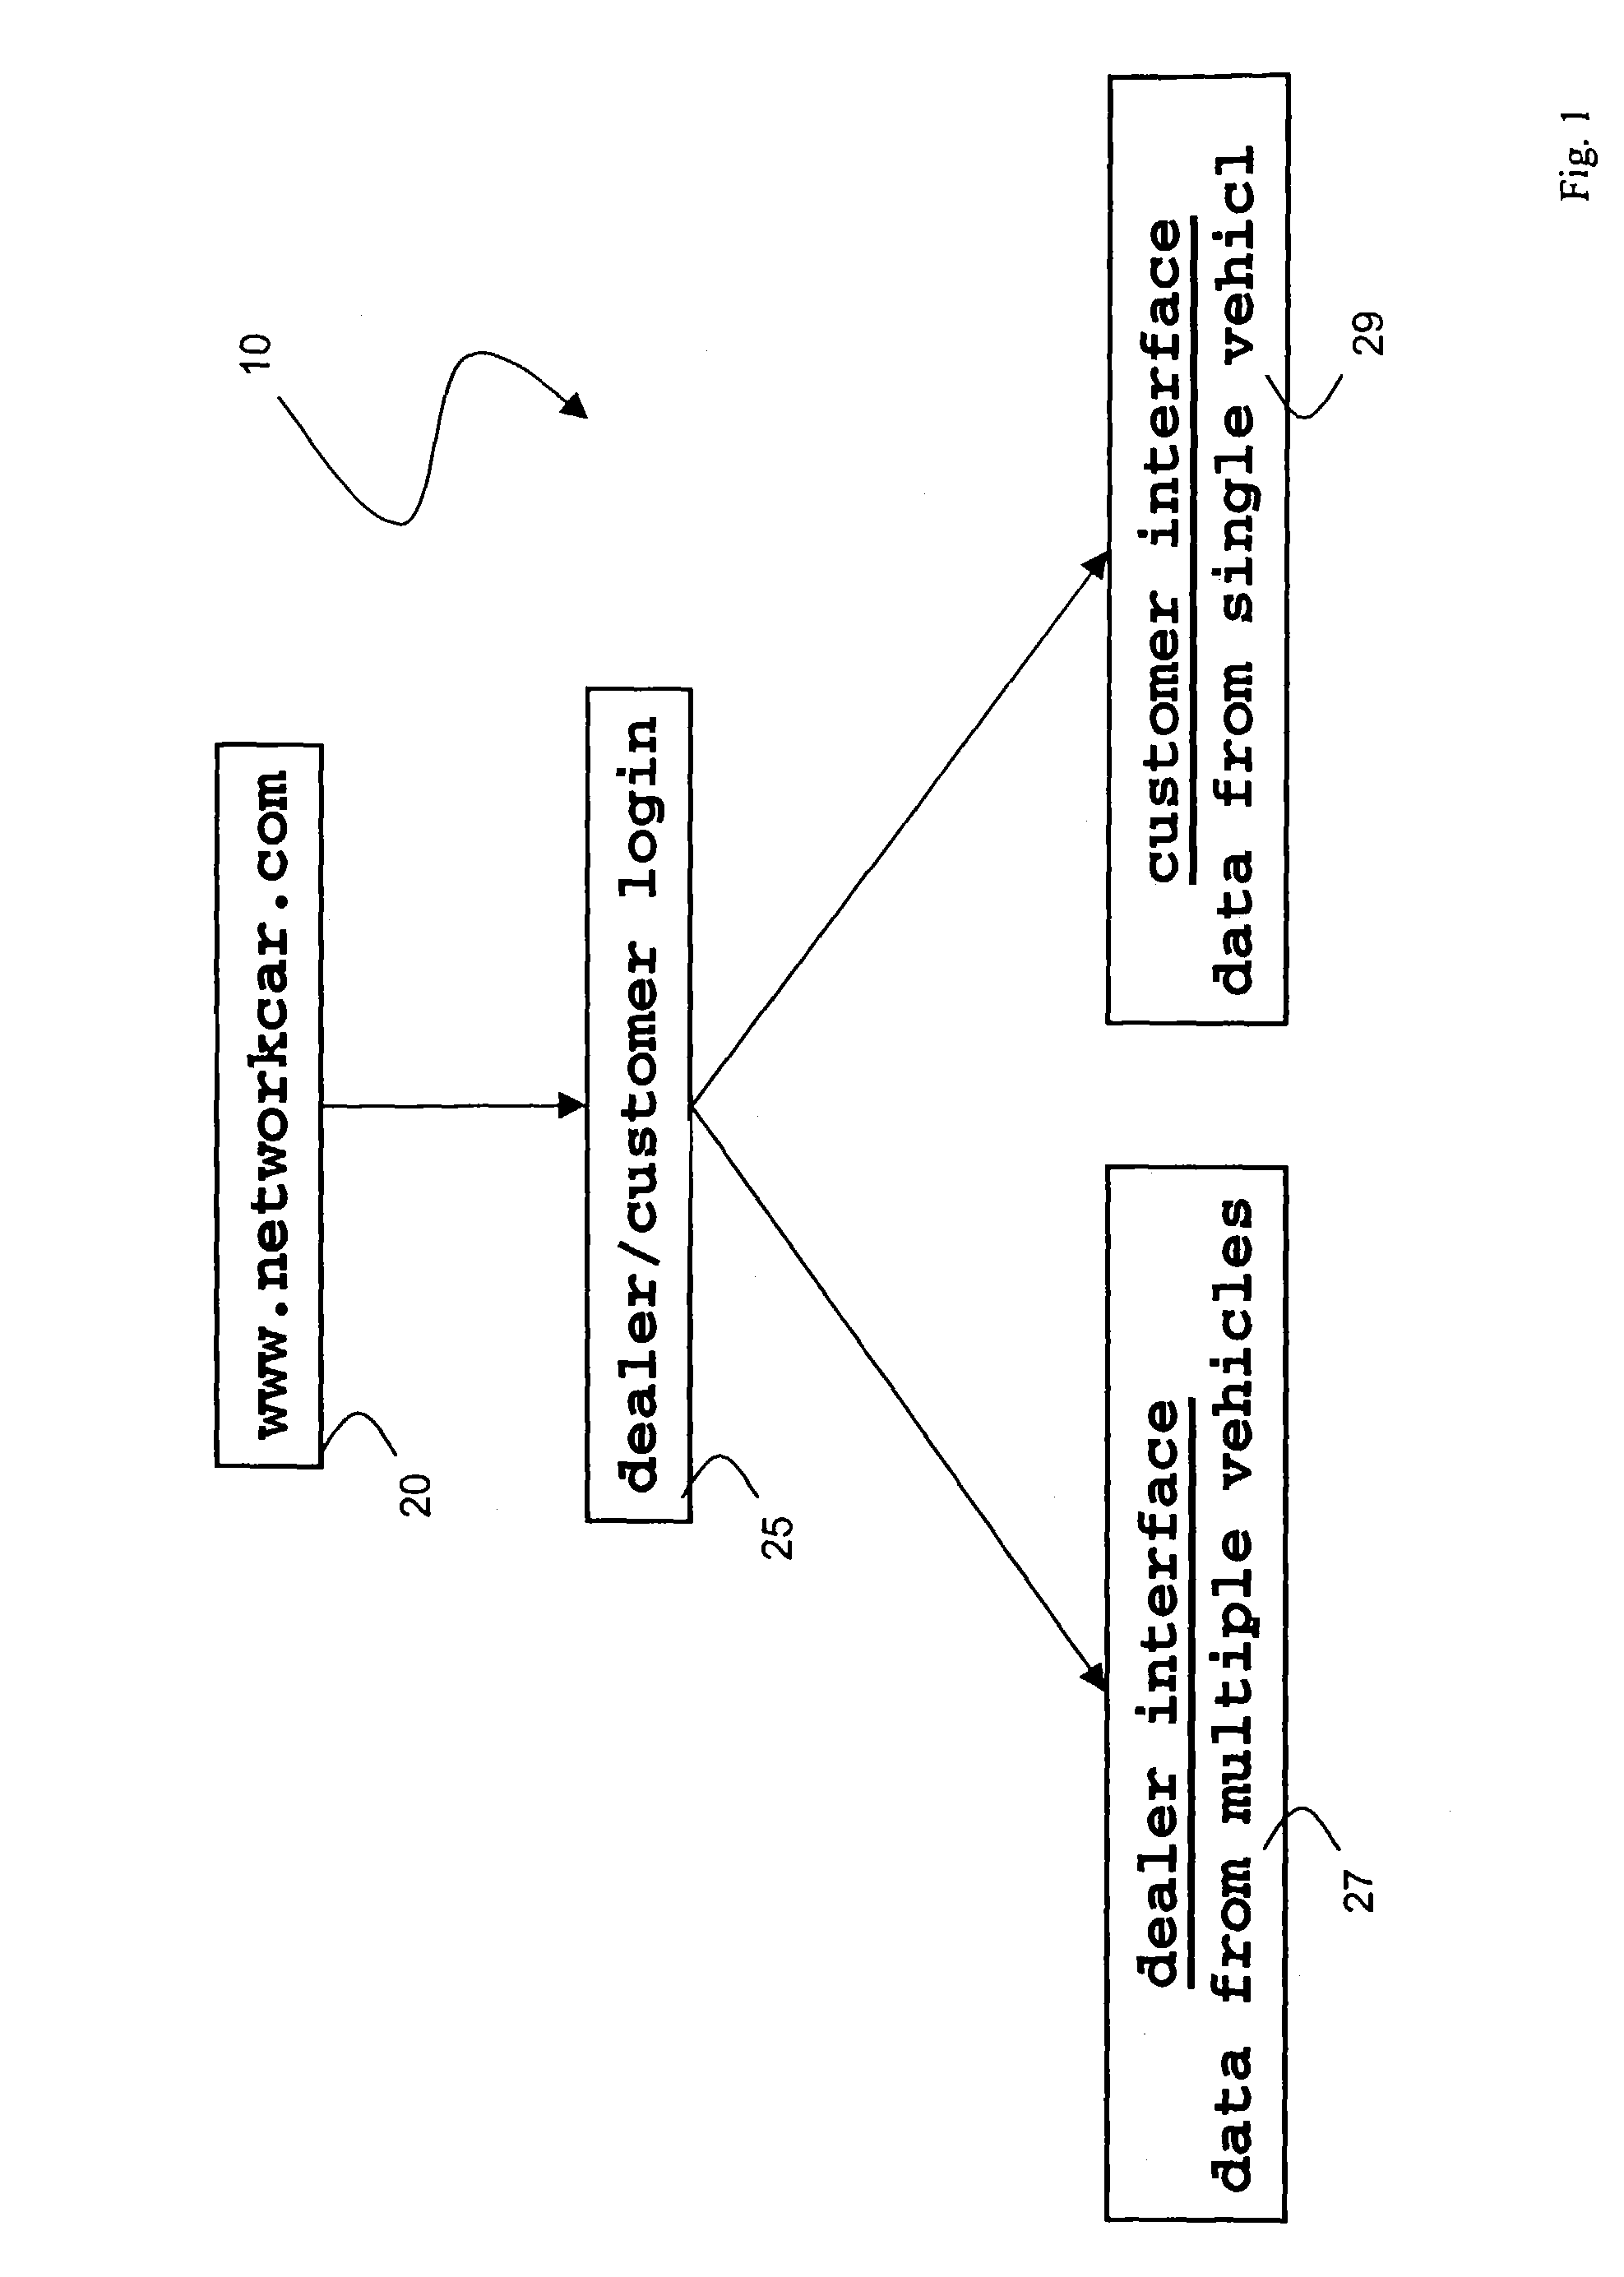 Internet-based system for monitoring vehicles